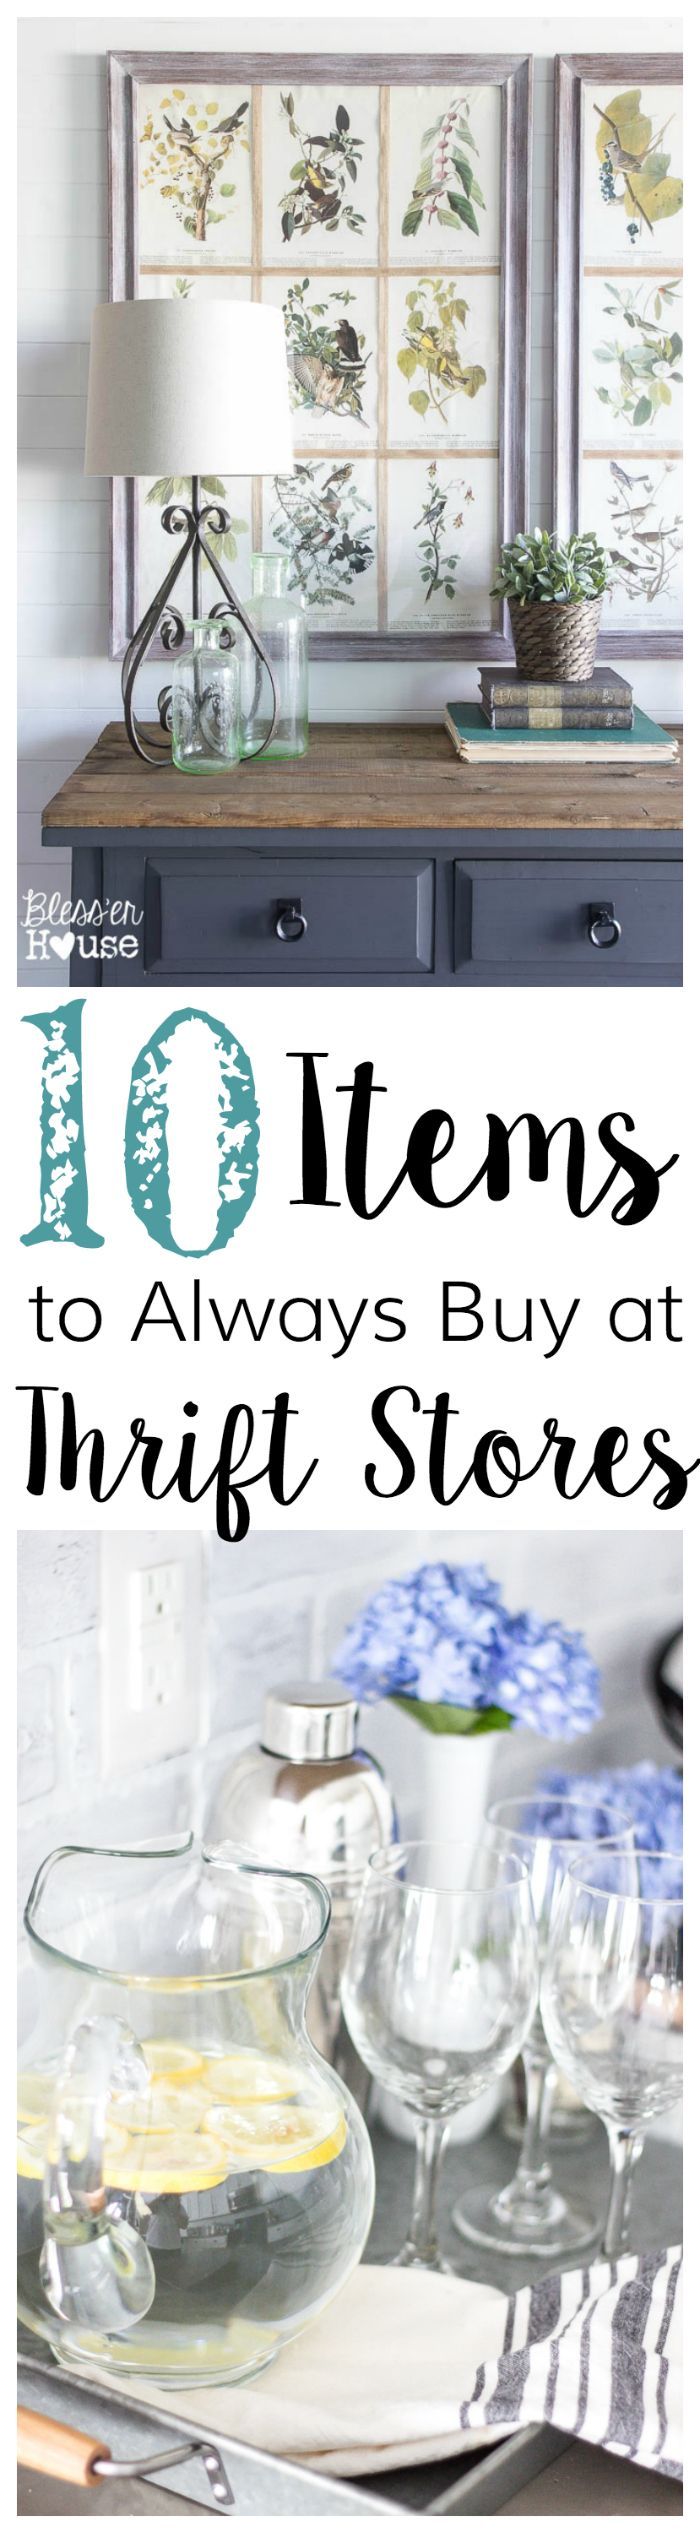 10 Items to Always Buy at Thrift Stores